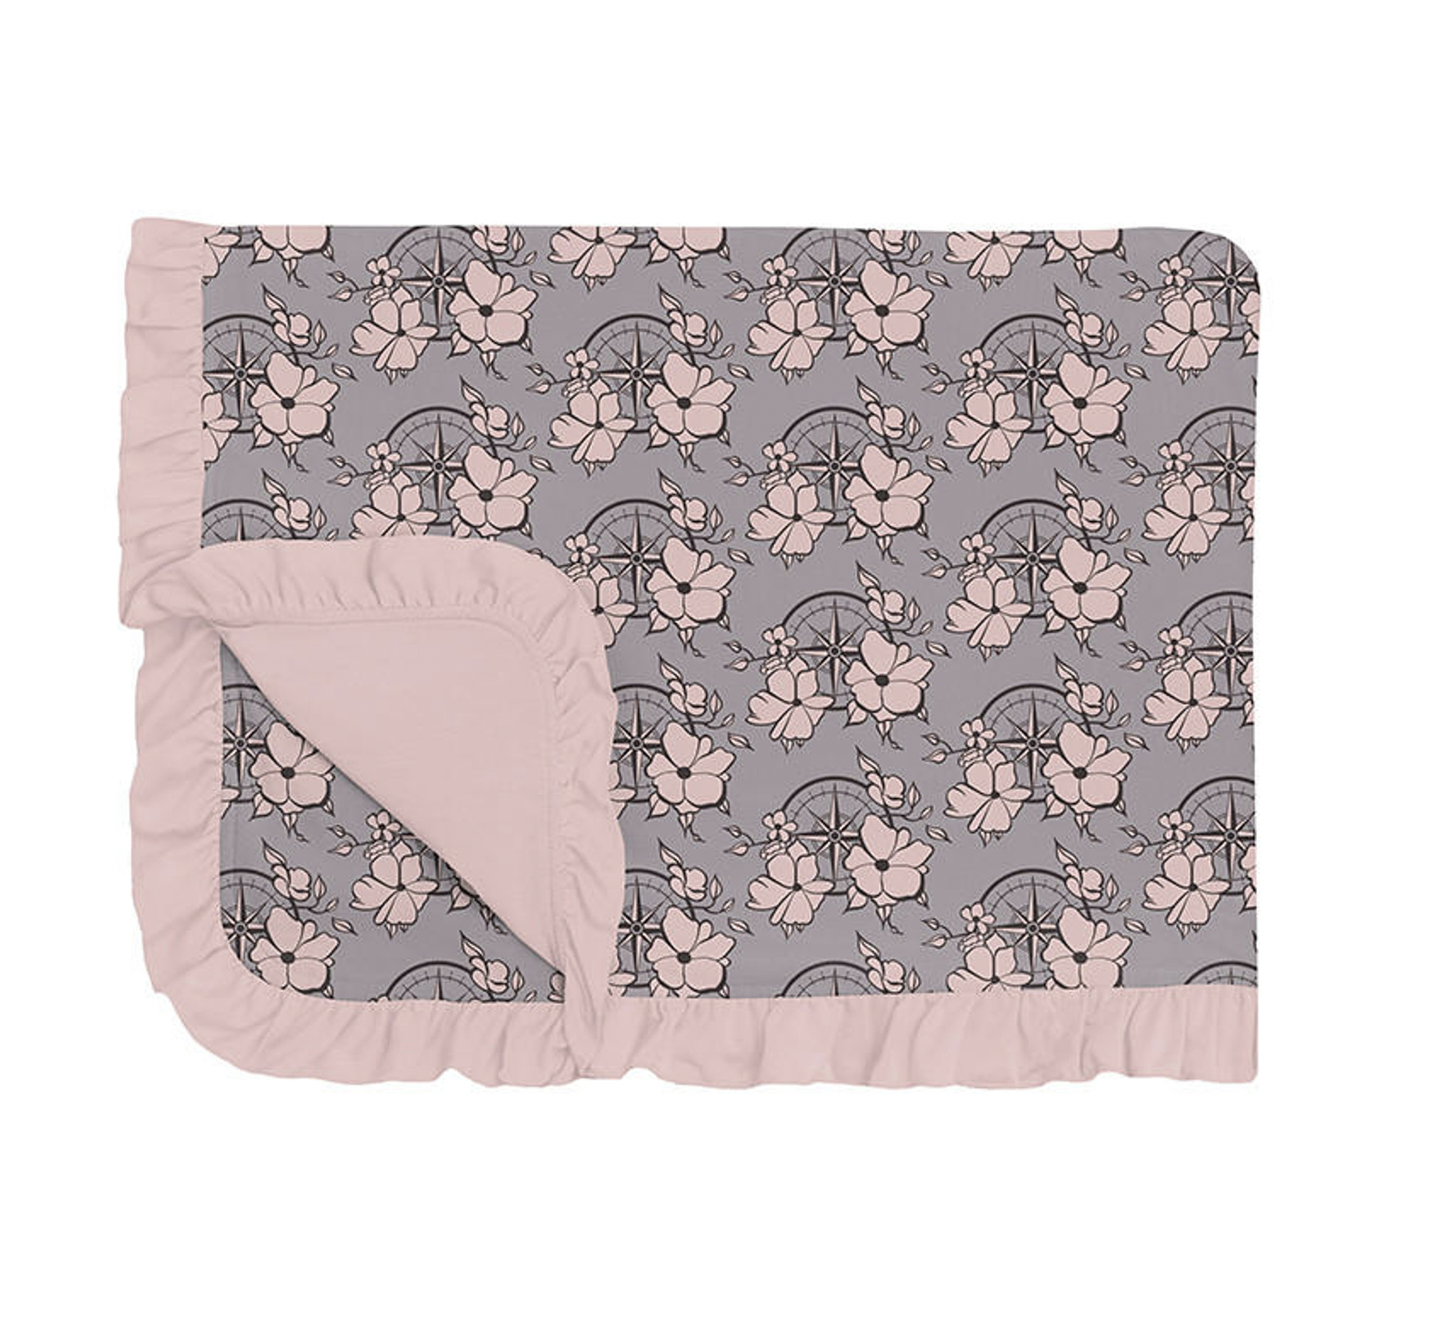 Feather Nautical Floral Toddler Blanket